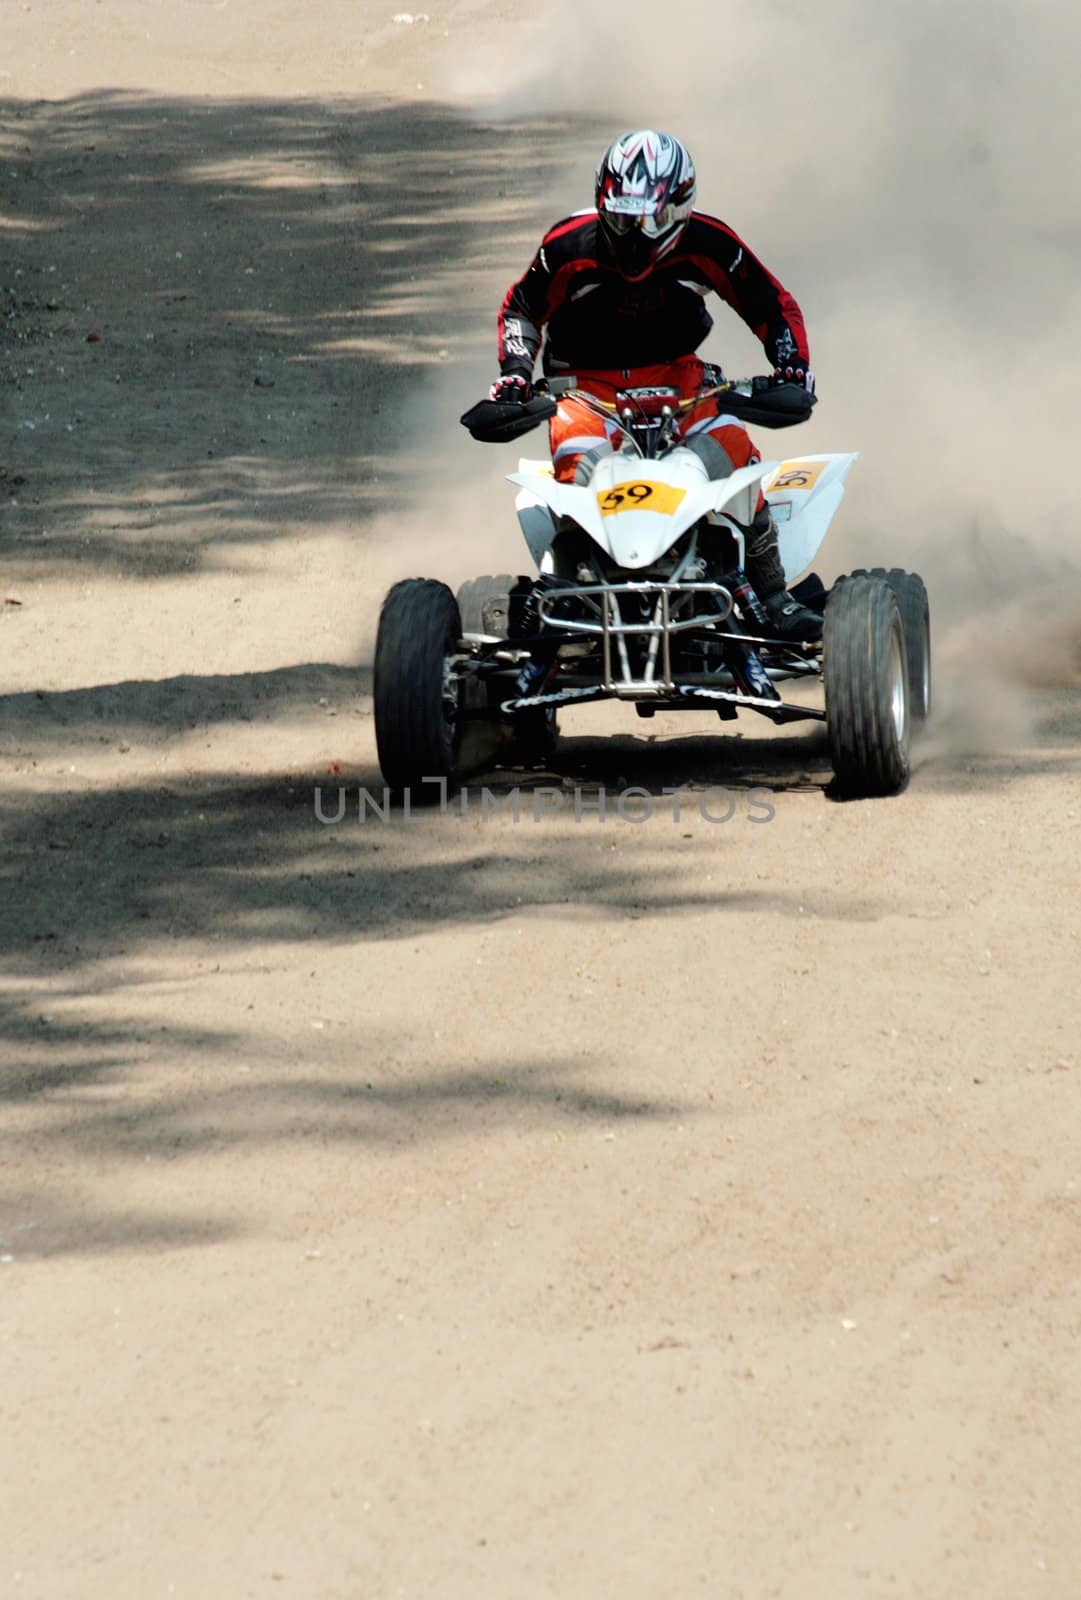 Man on quad bike during a race